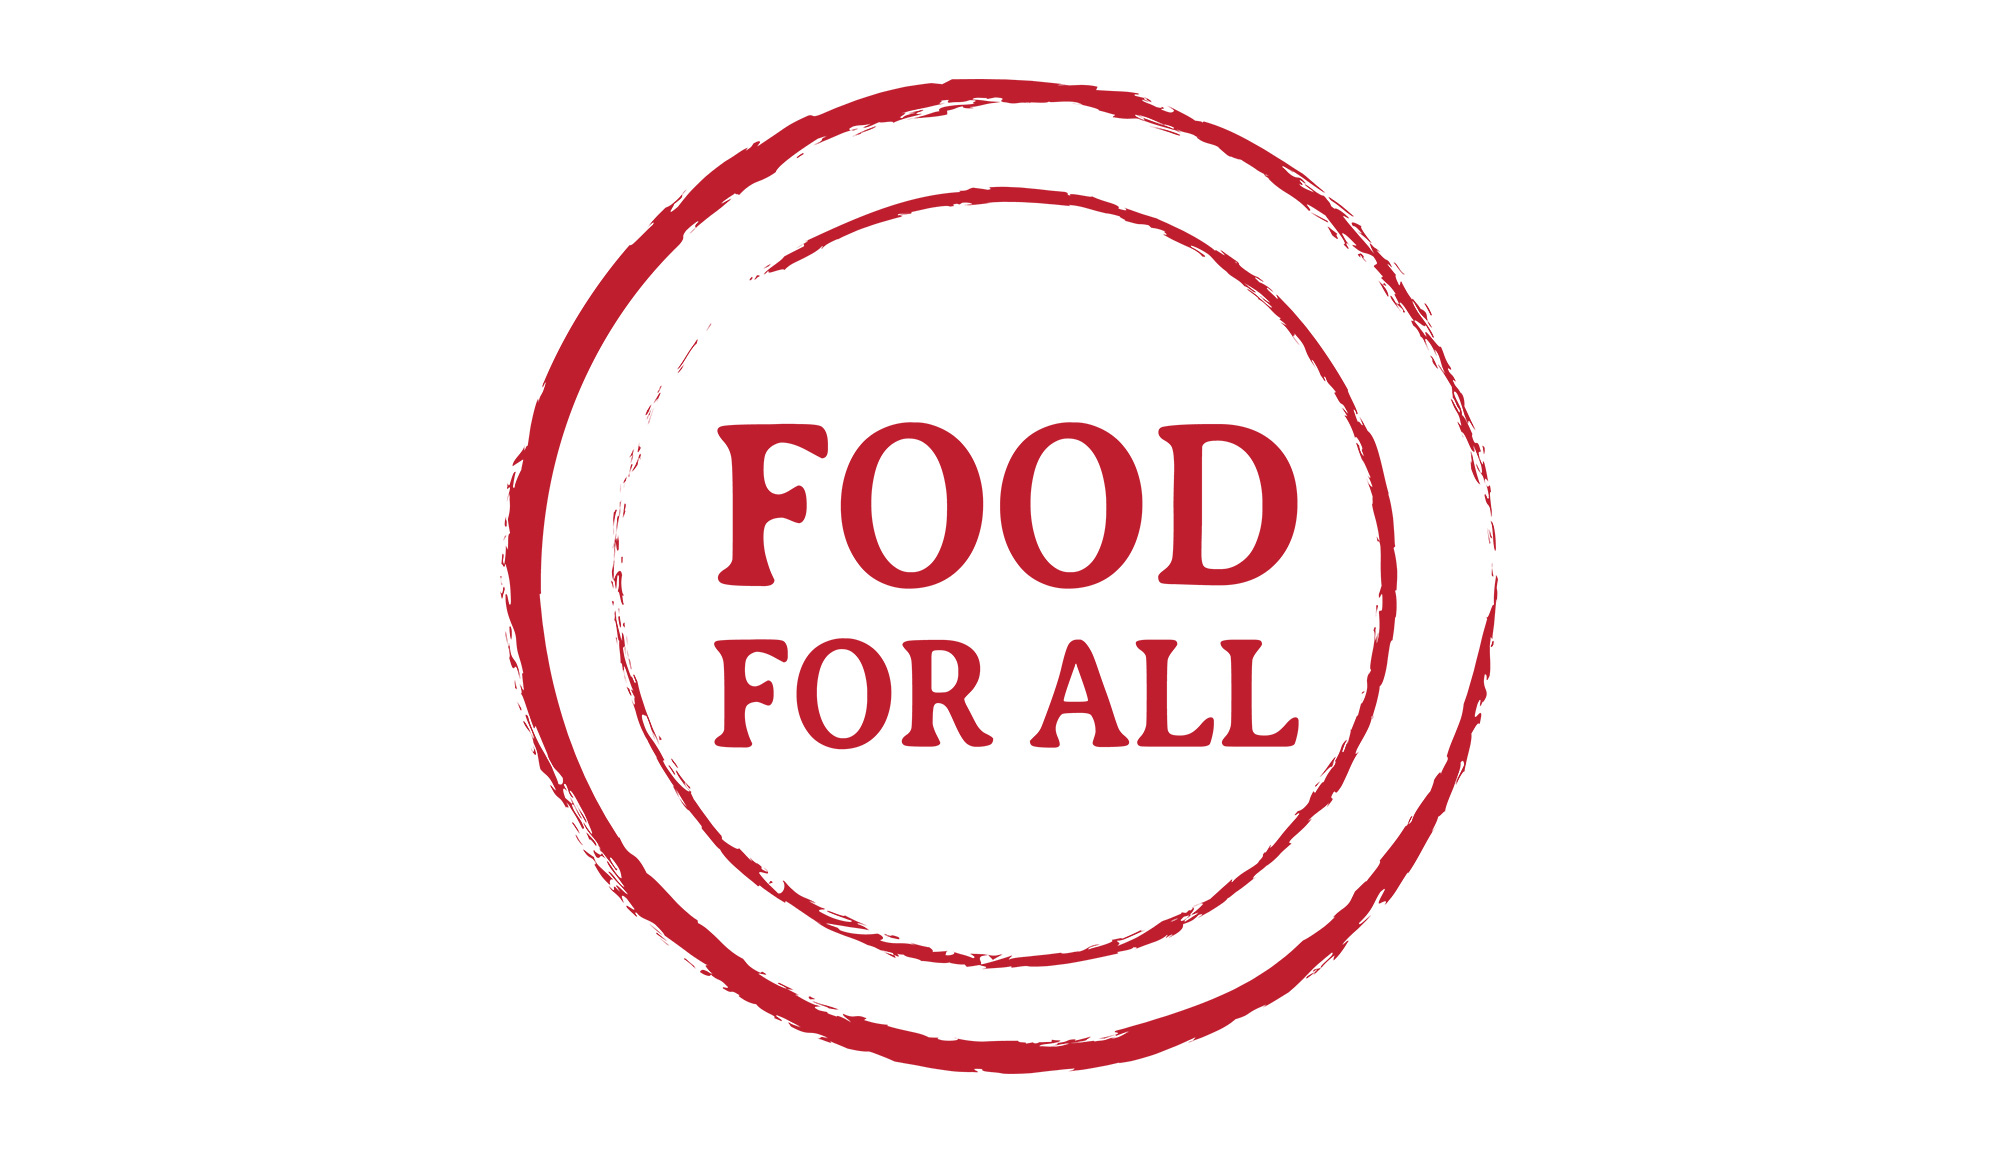 Food for All